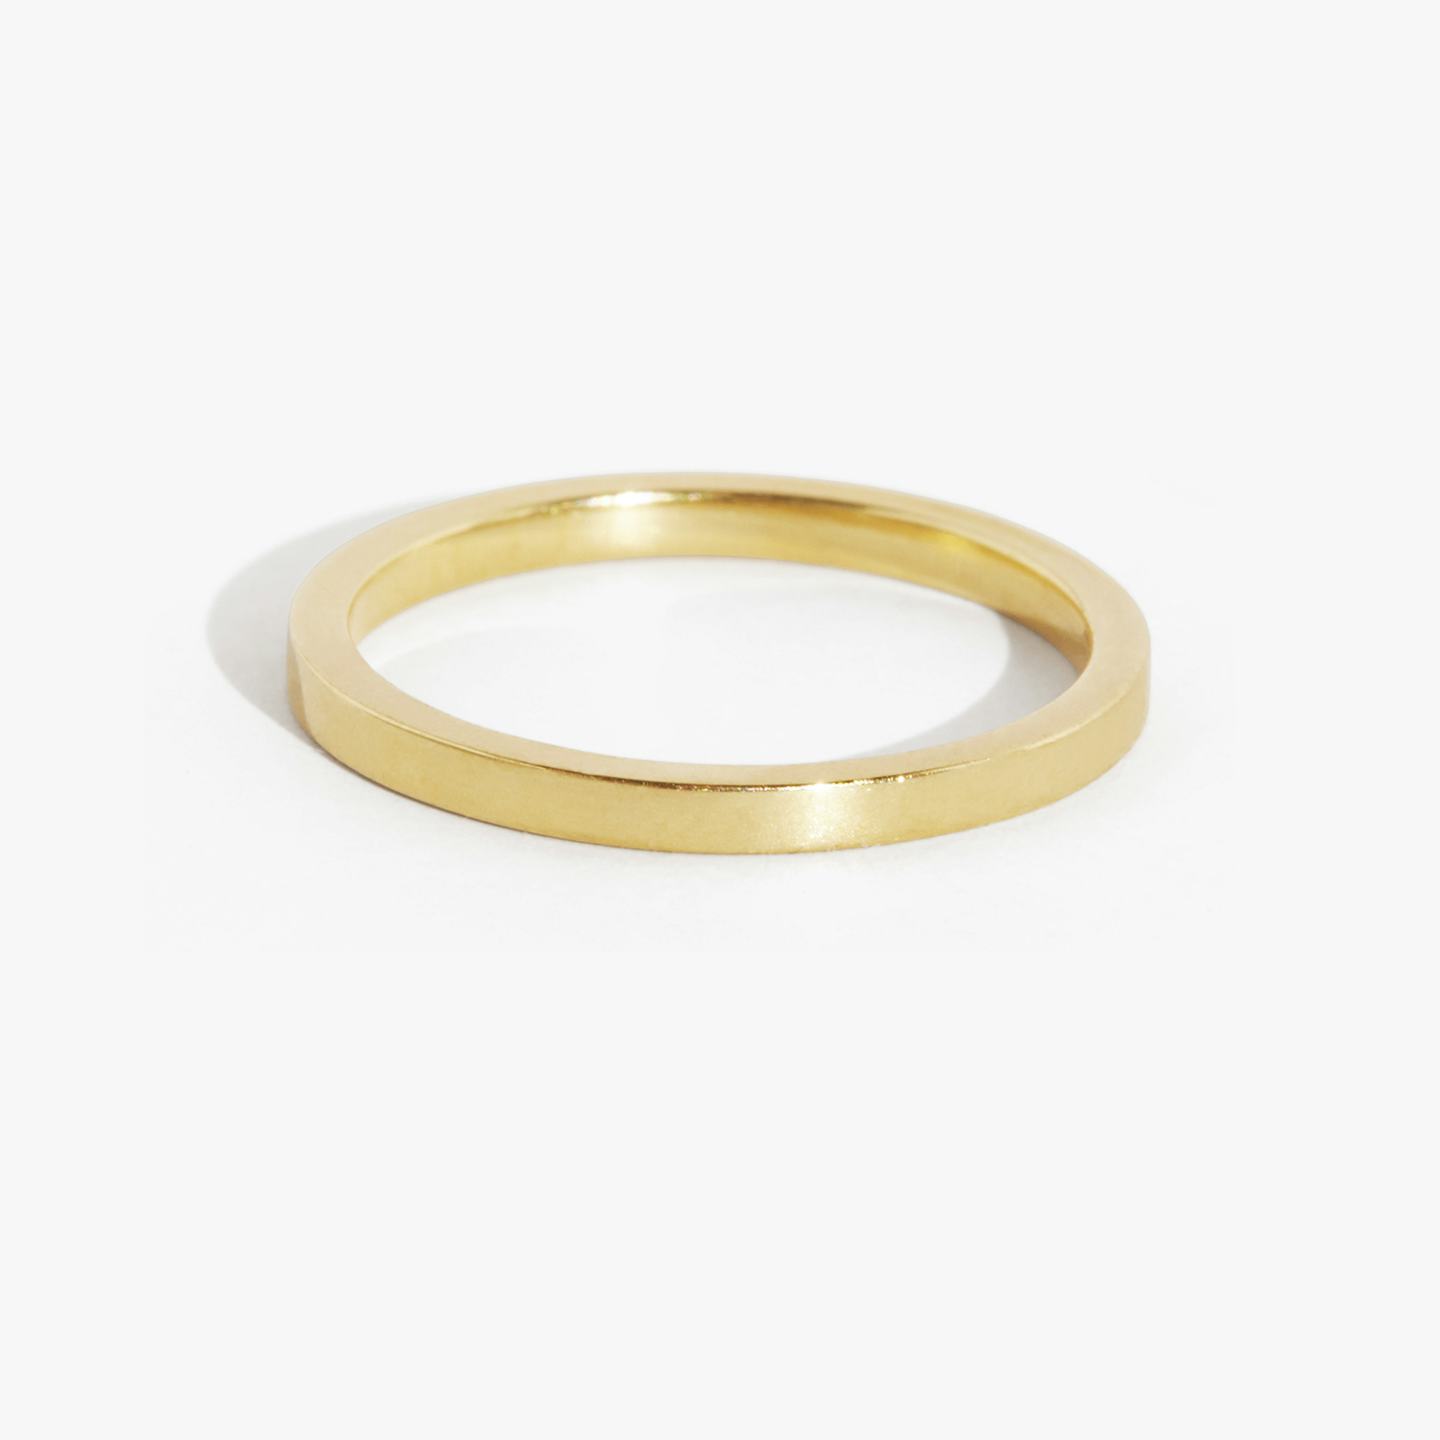 The Flat | 18k | 18k Yellow Gold | Band width: Small - 1.5mm